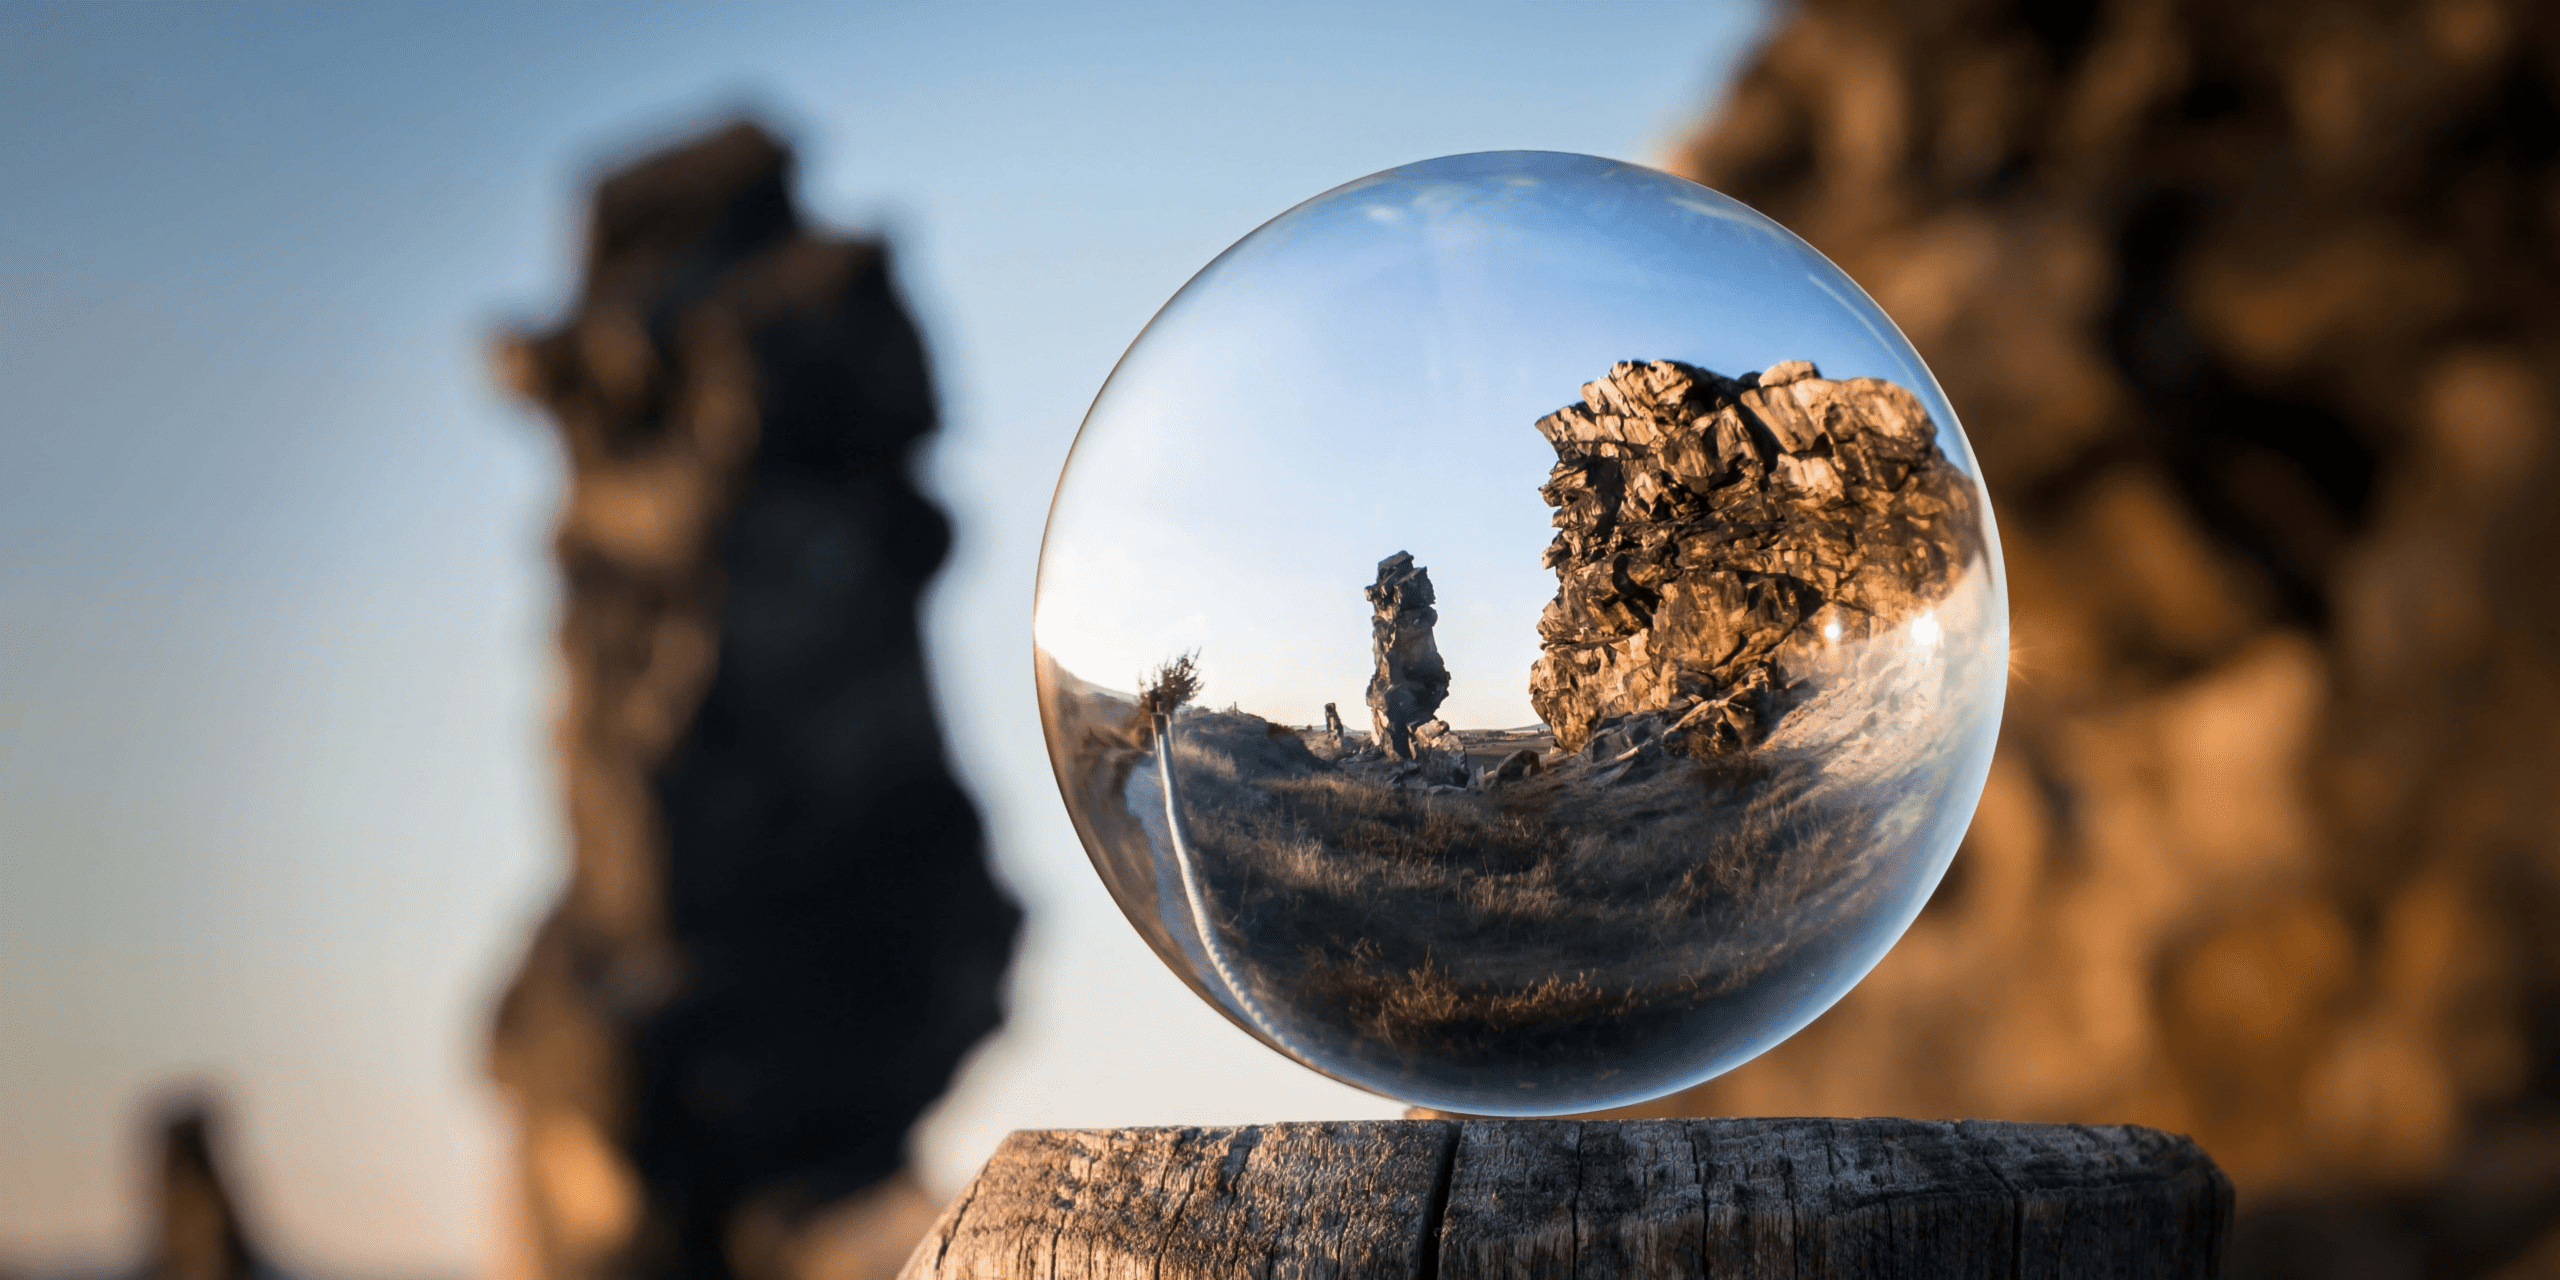 a glass ball with a reflection of a rocky landscape